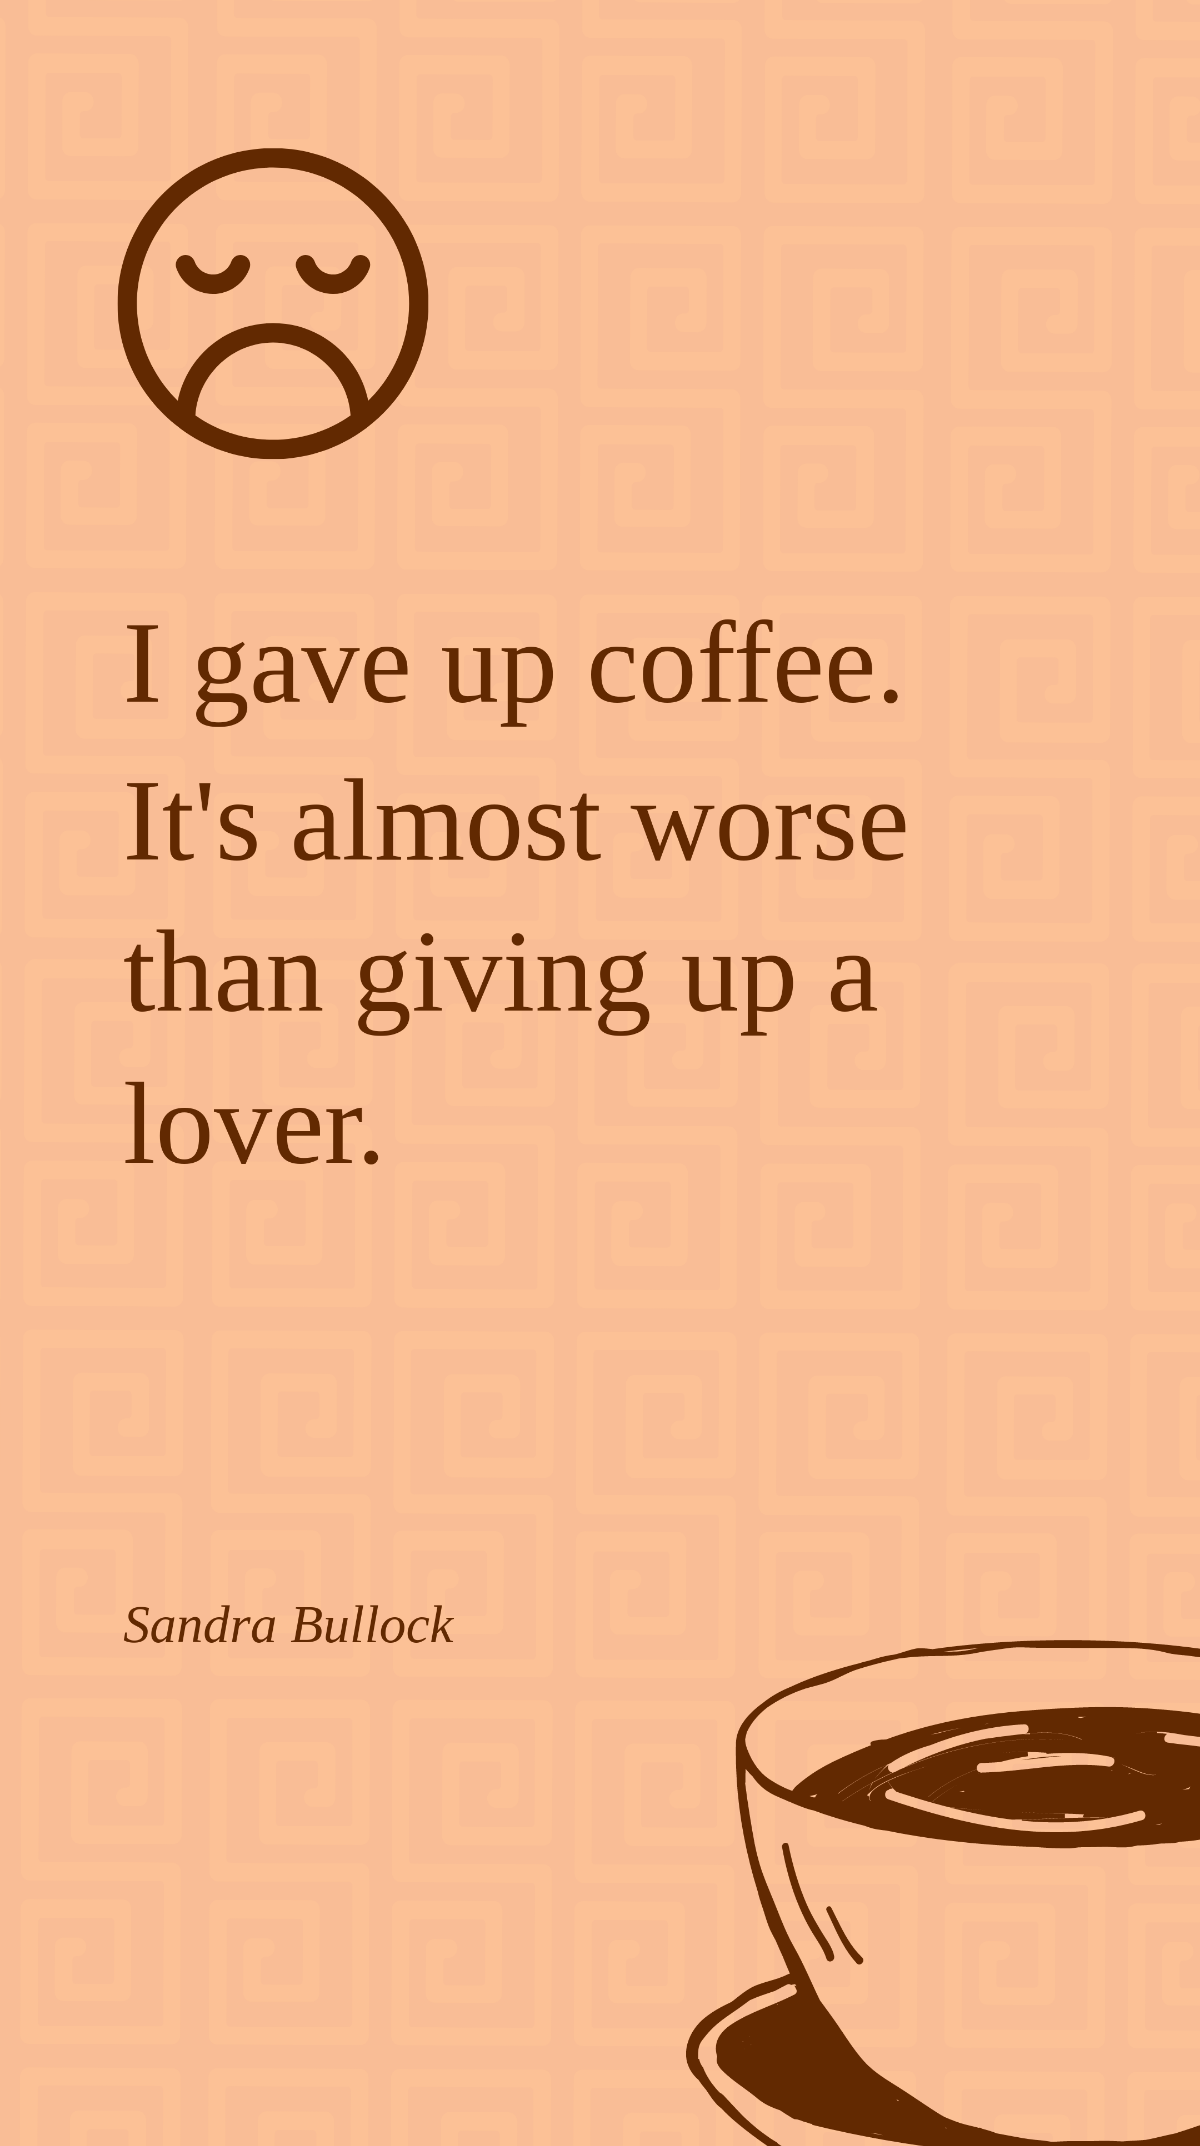 Sandra Bullock - I gave up coffee. It's almost worse than giving up a lover. Template